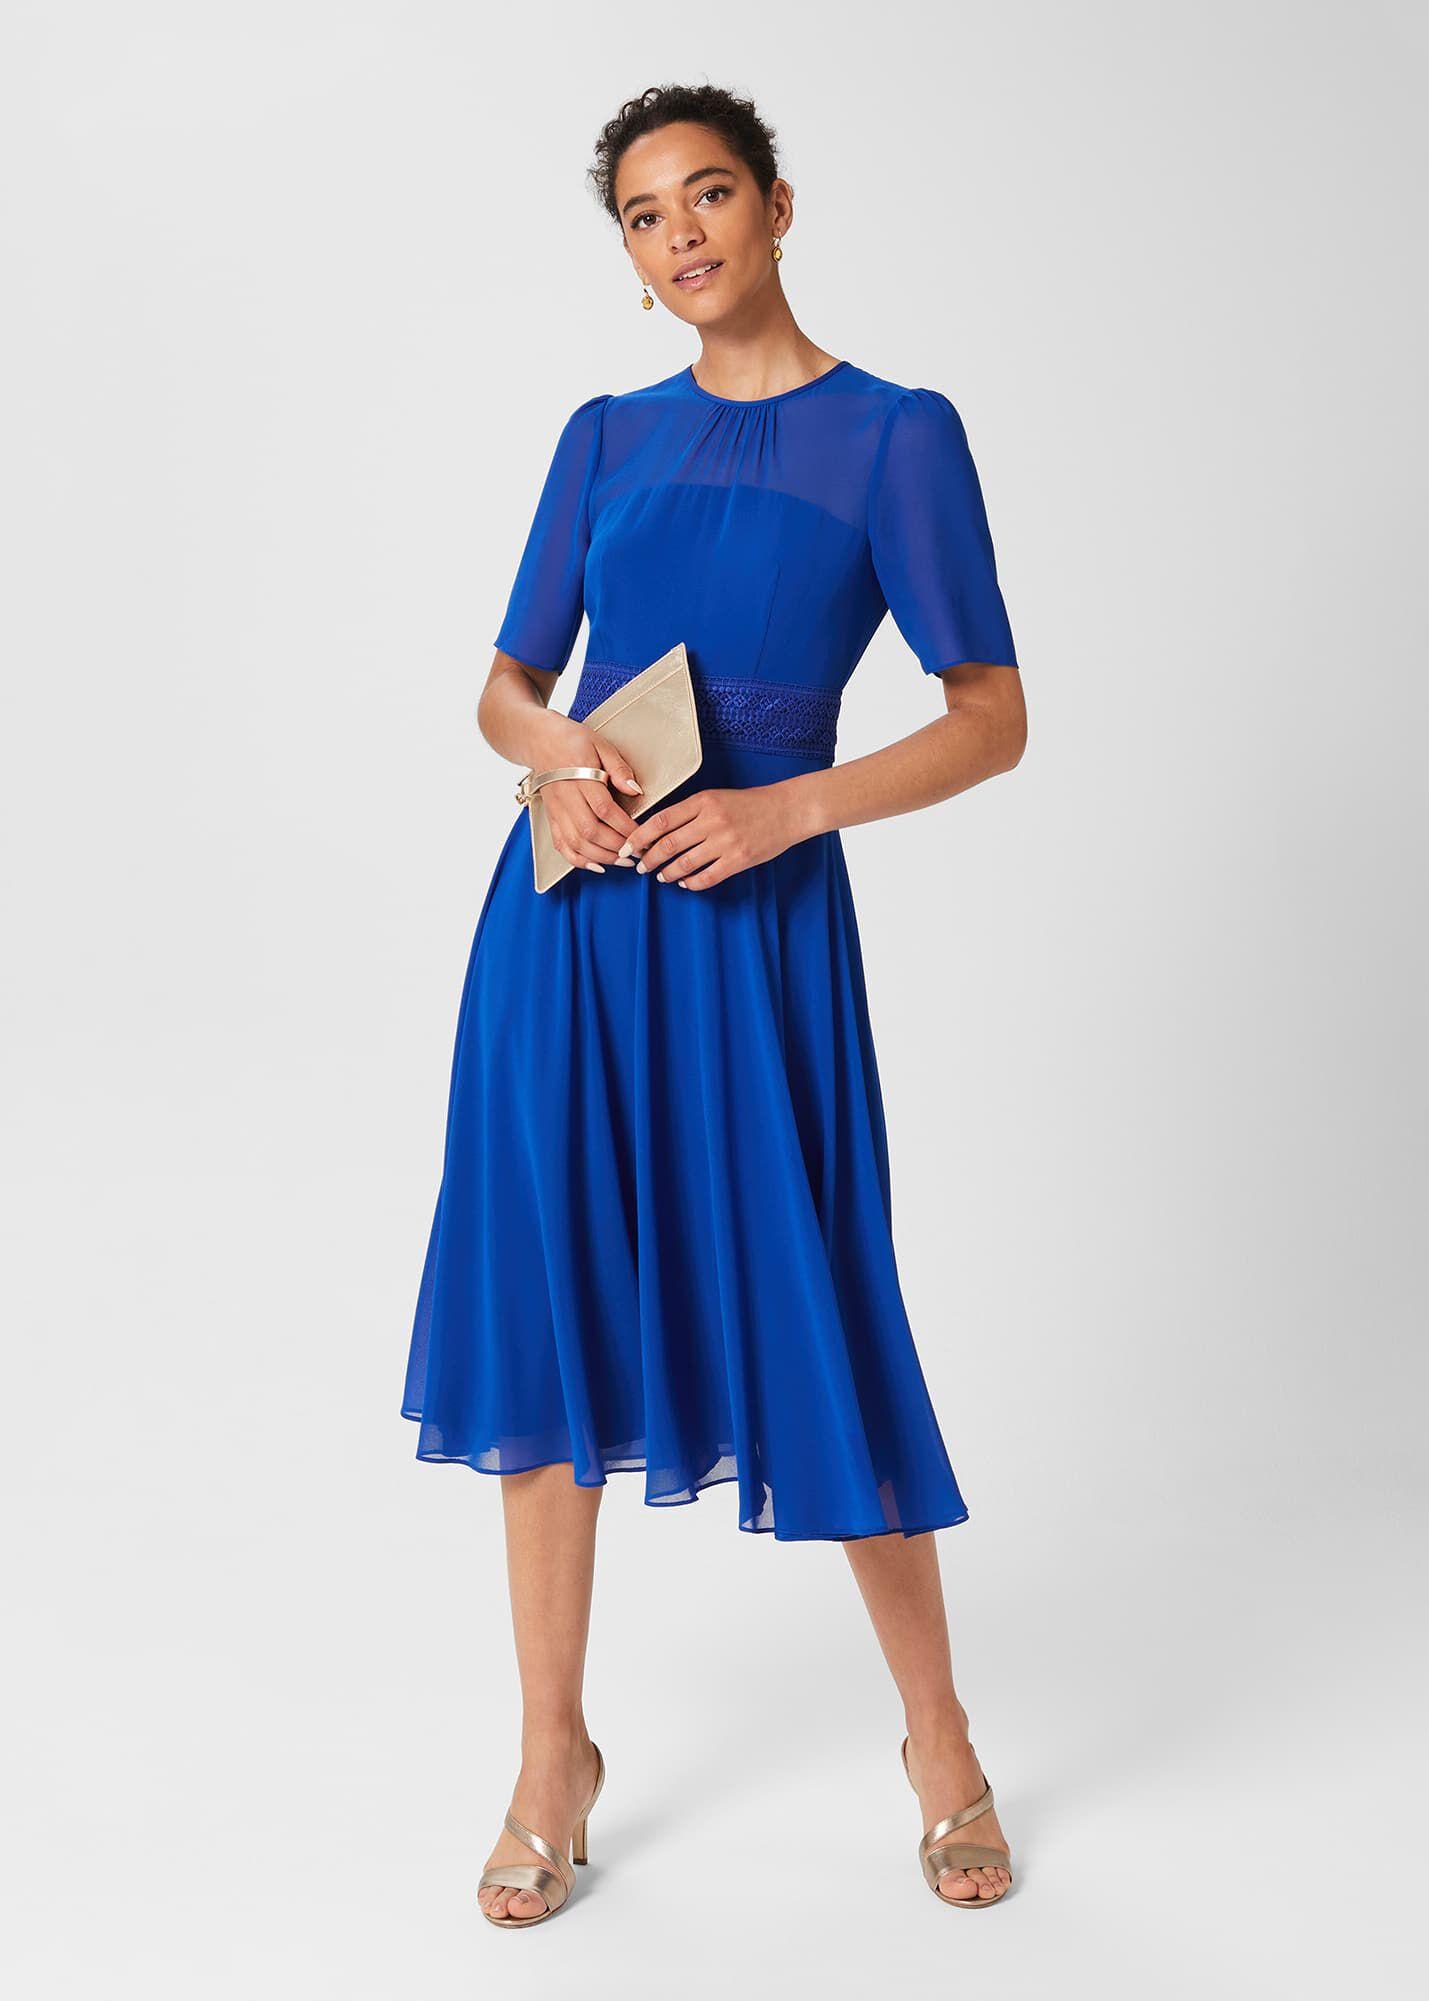 Hobbs Cressida Fit And Flare Dress in Blue | Lyst UK